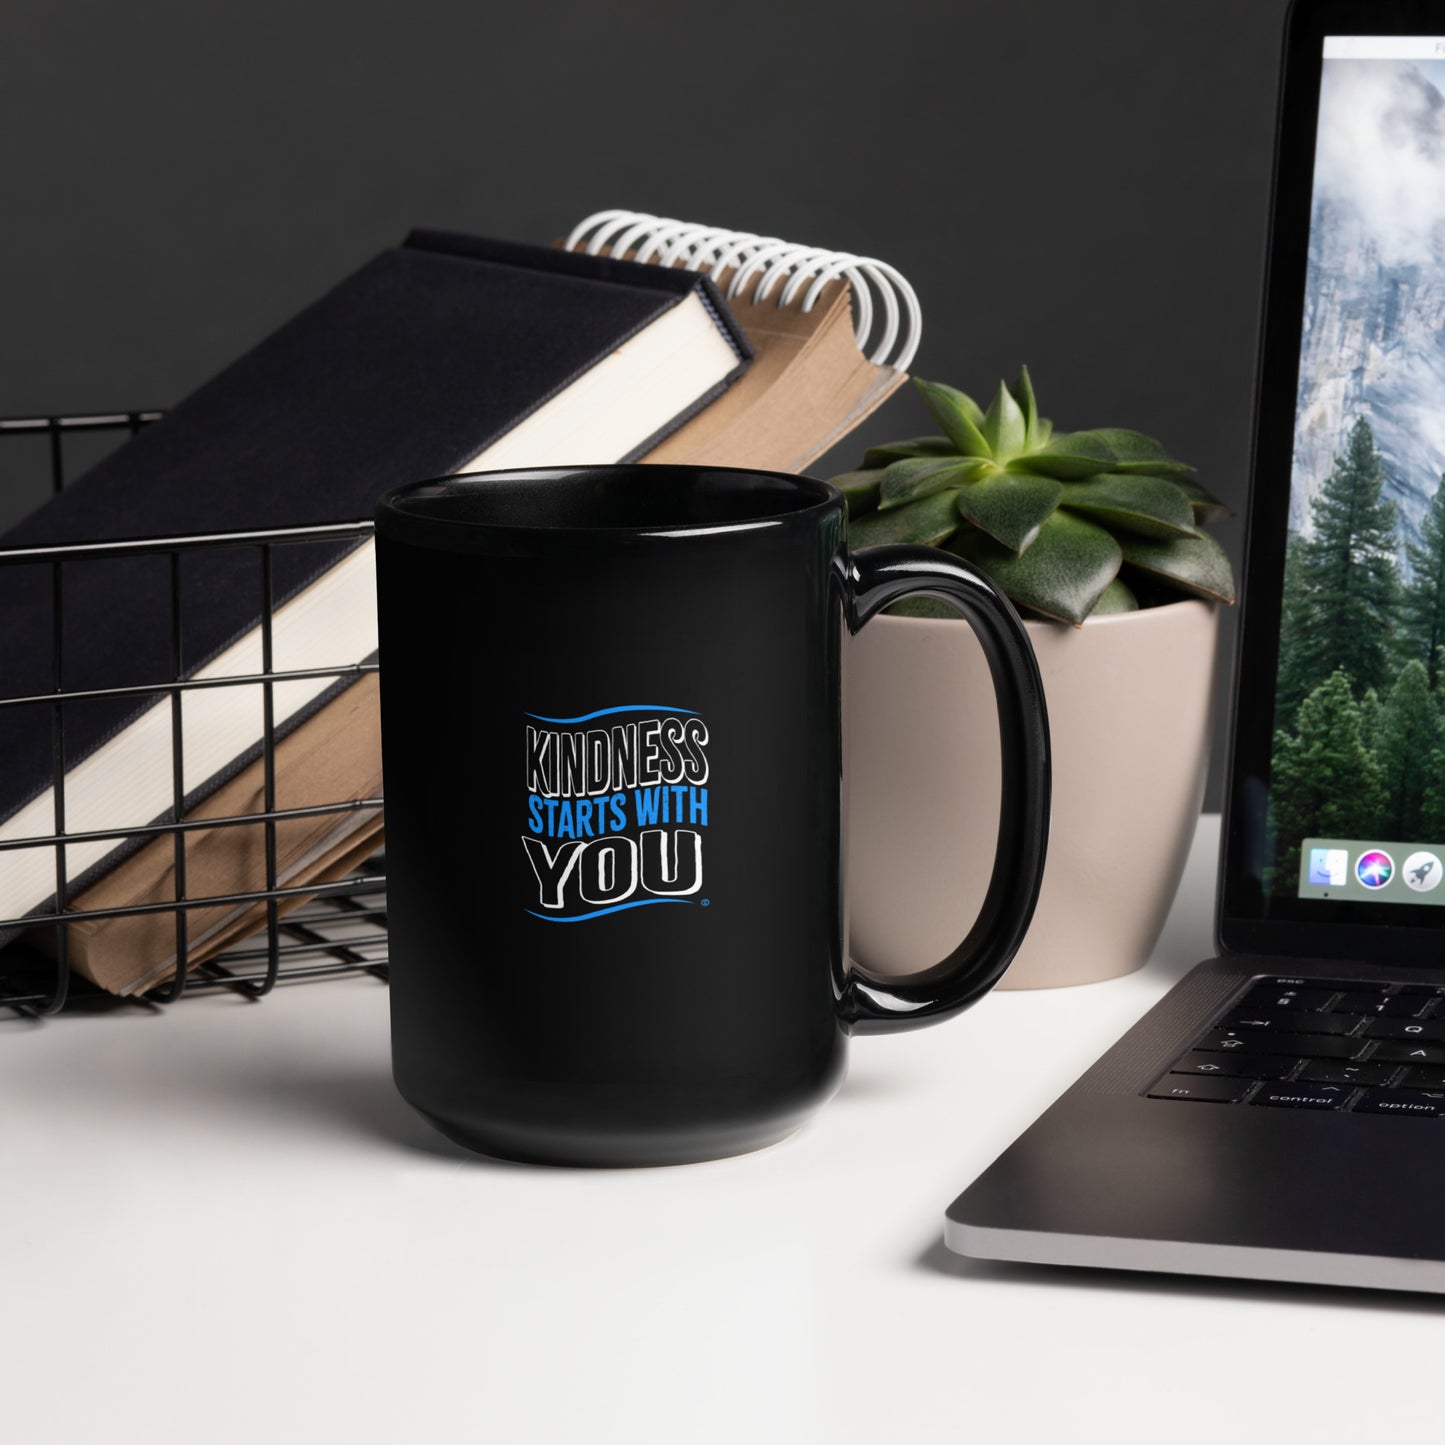 Kindness Starts with You Black Glossy Mugs